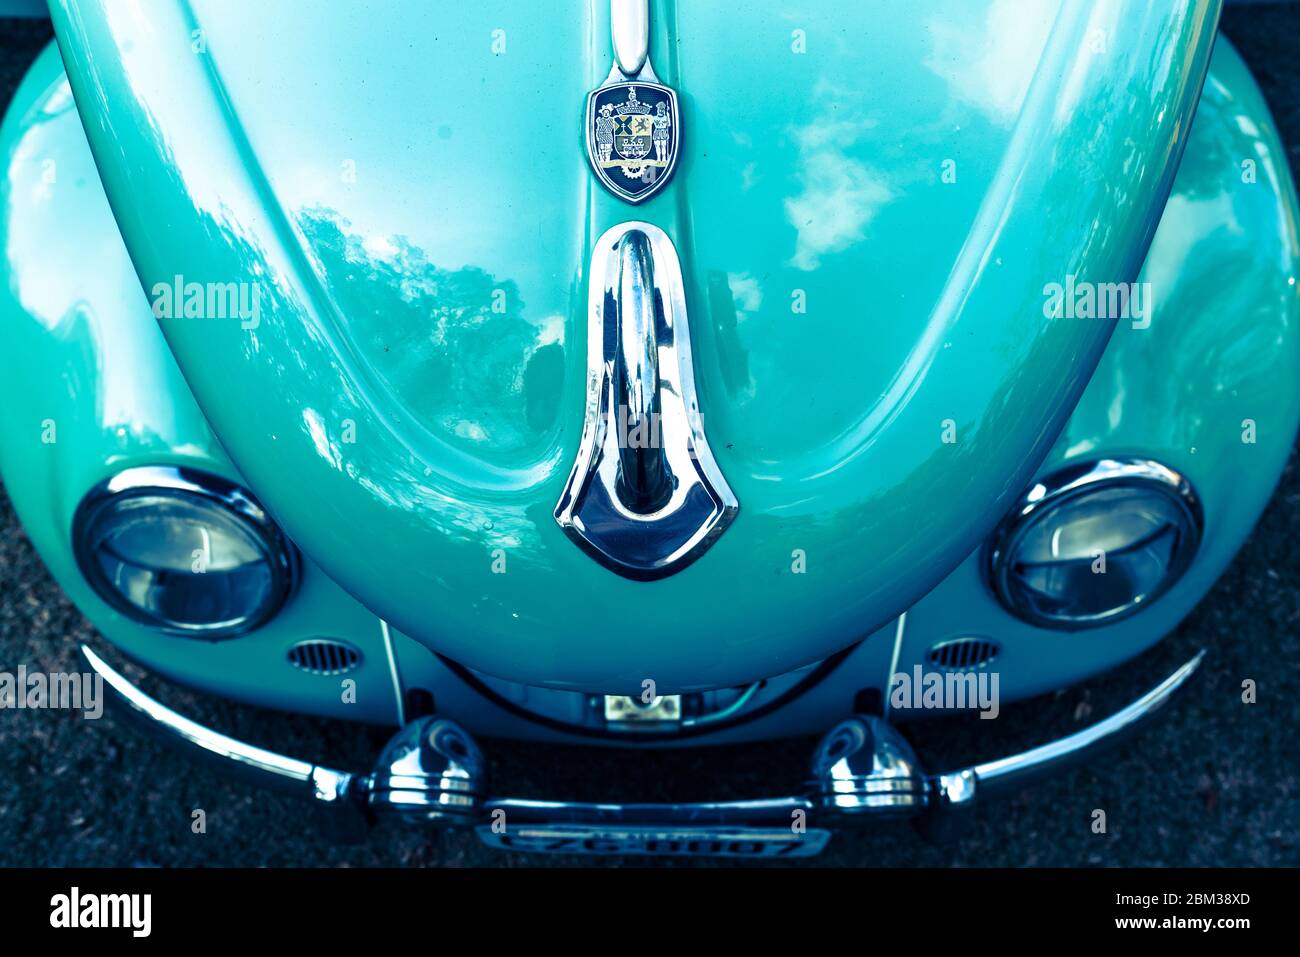 A Blue Volkswagen Beetle 1969,  front view image Stock Photo